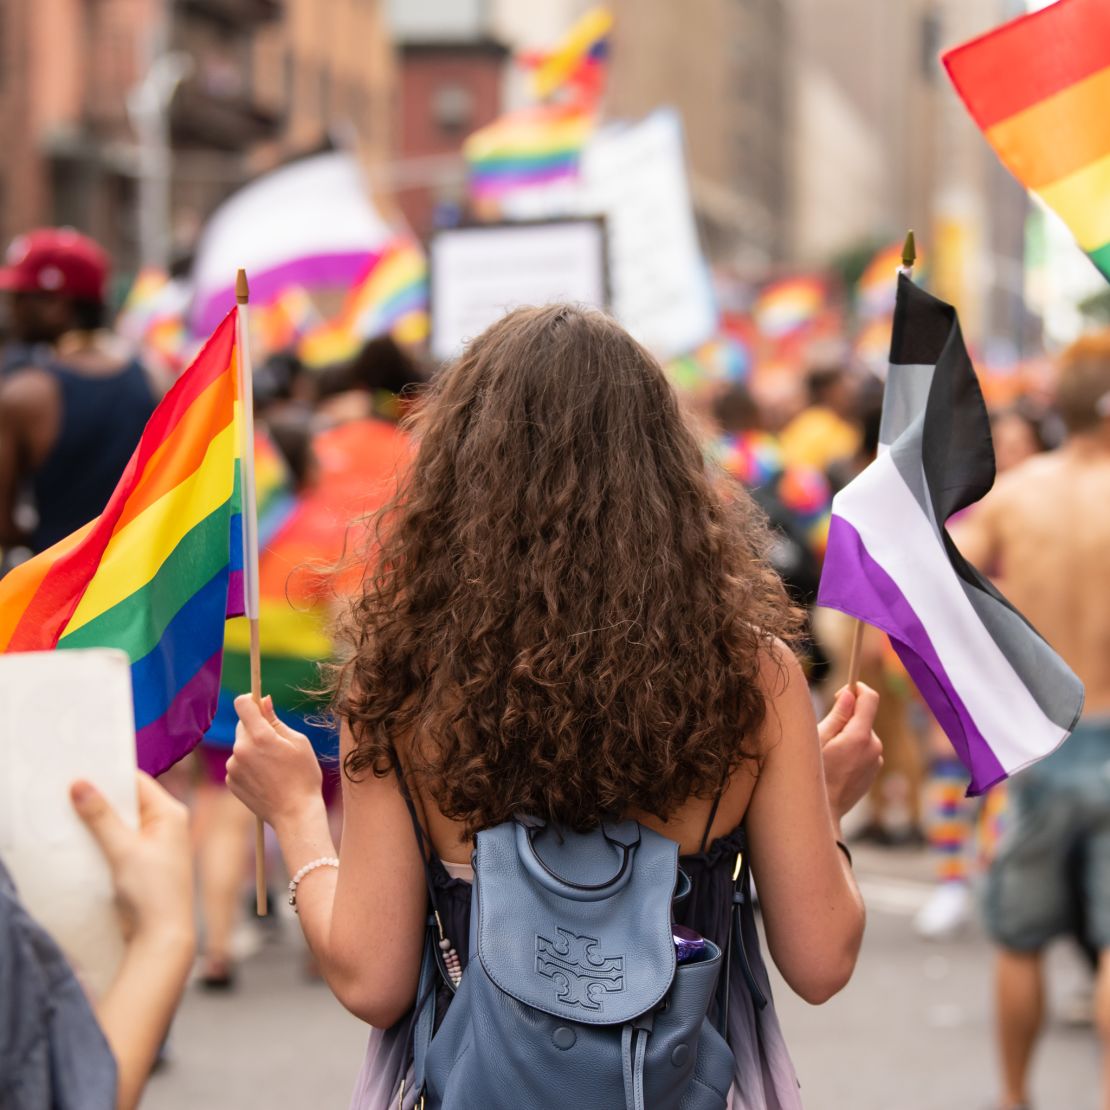 A woman carries the rainbow flag and the asexual pride flag at the WorldPride parade in New York on June 23.